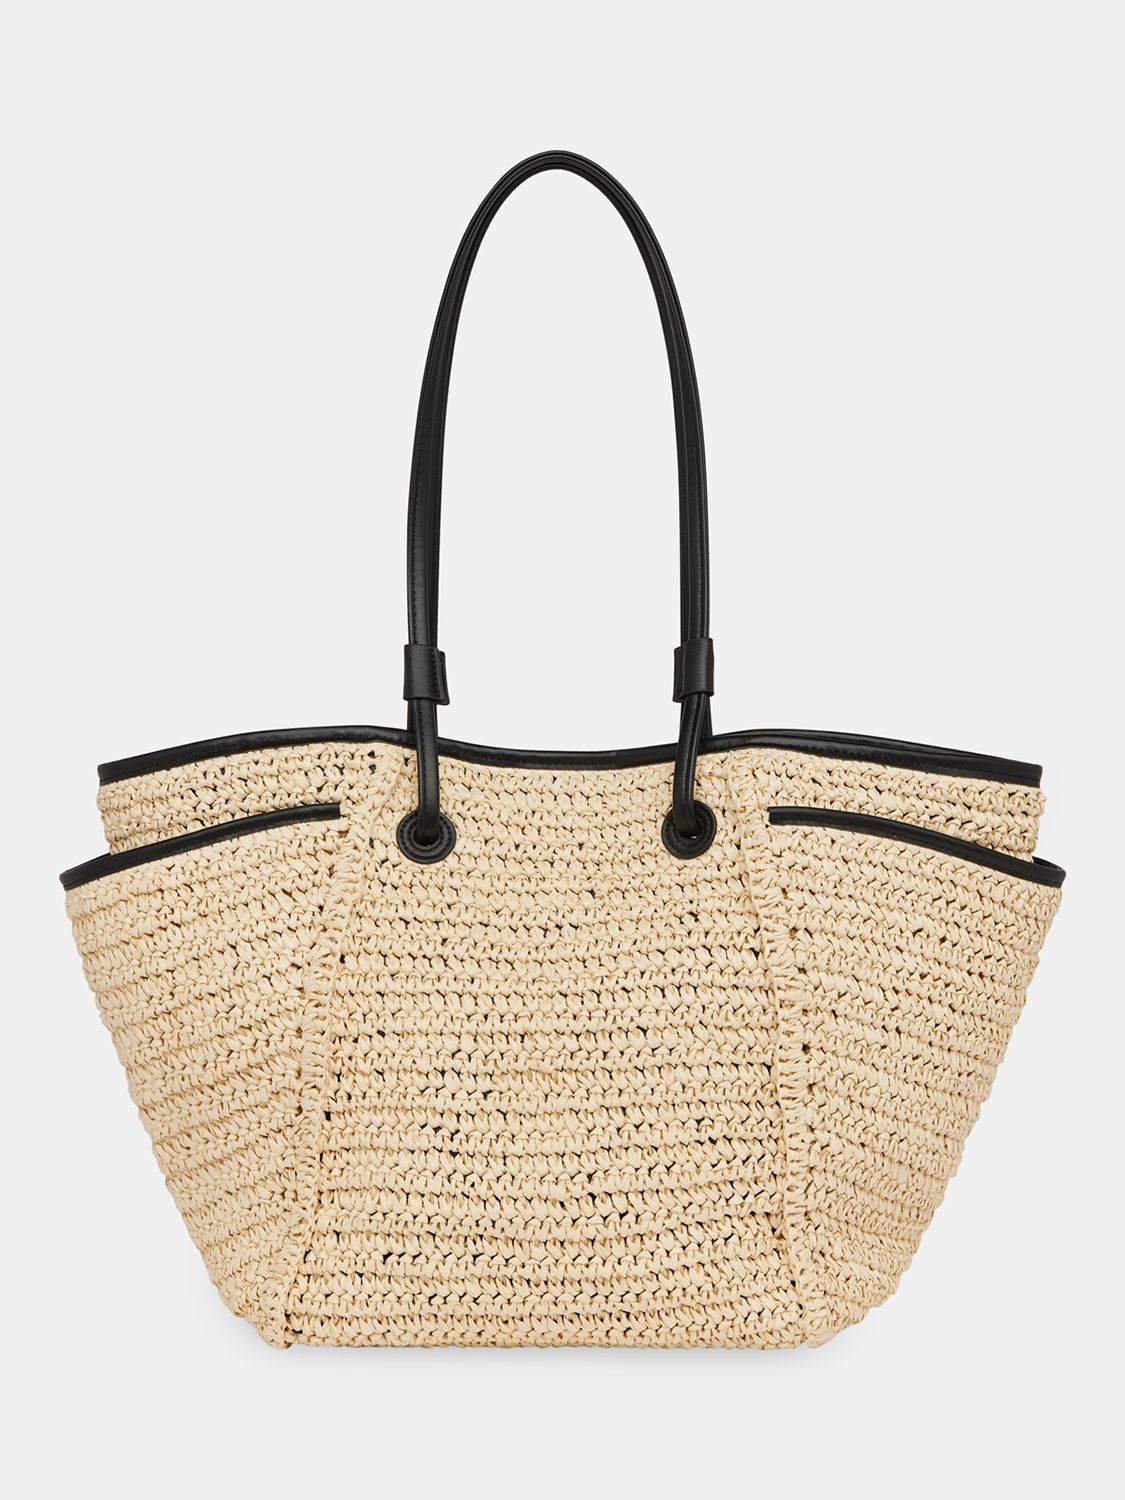 Whistles Zoelle Straw Tote Bag, Natural, One Size